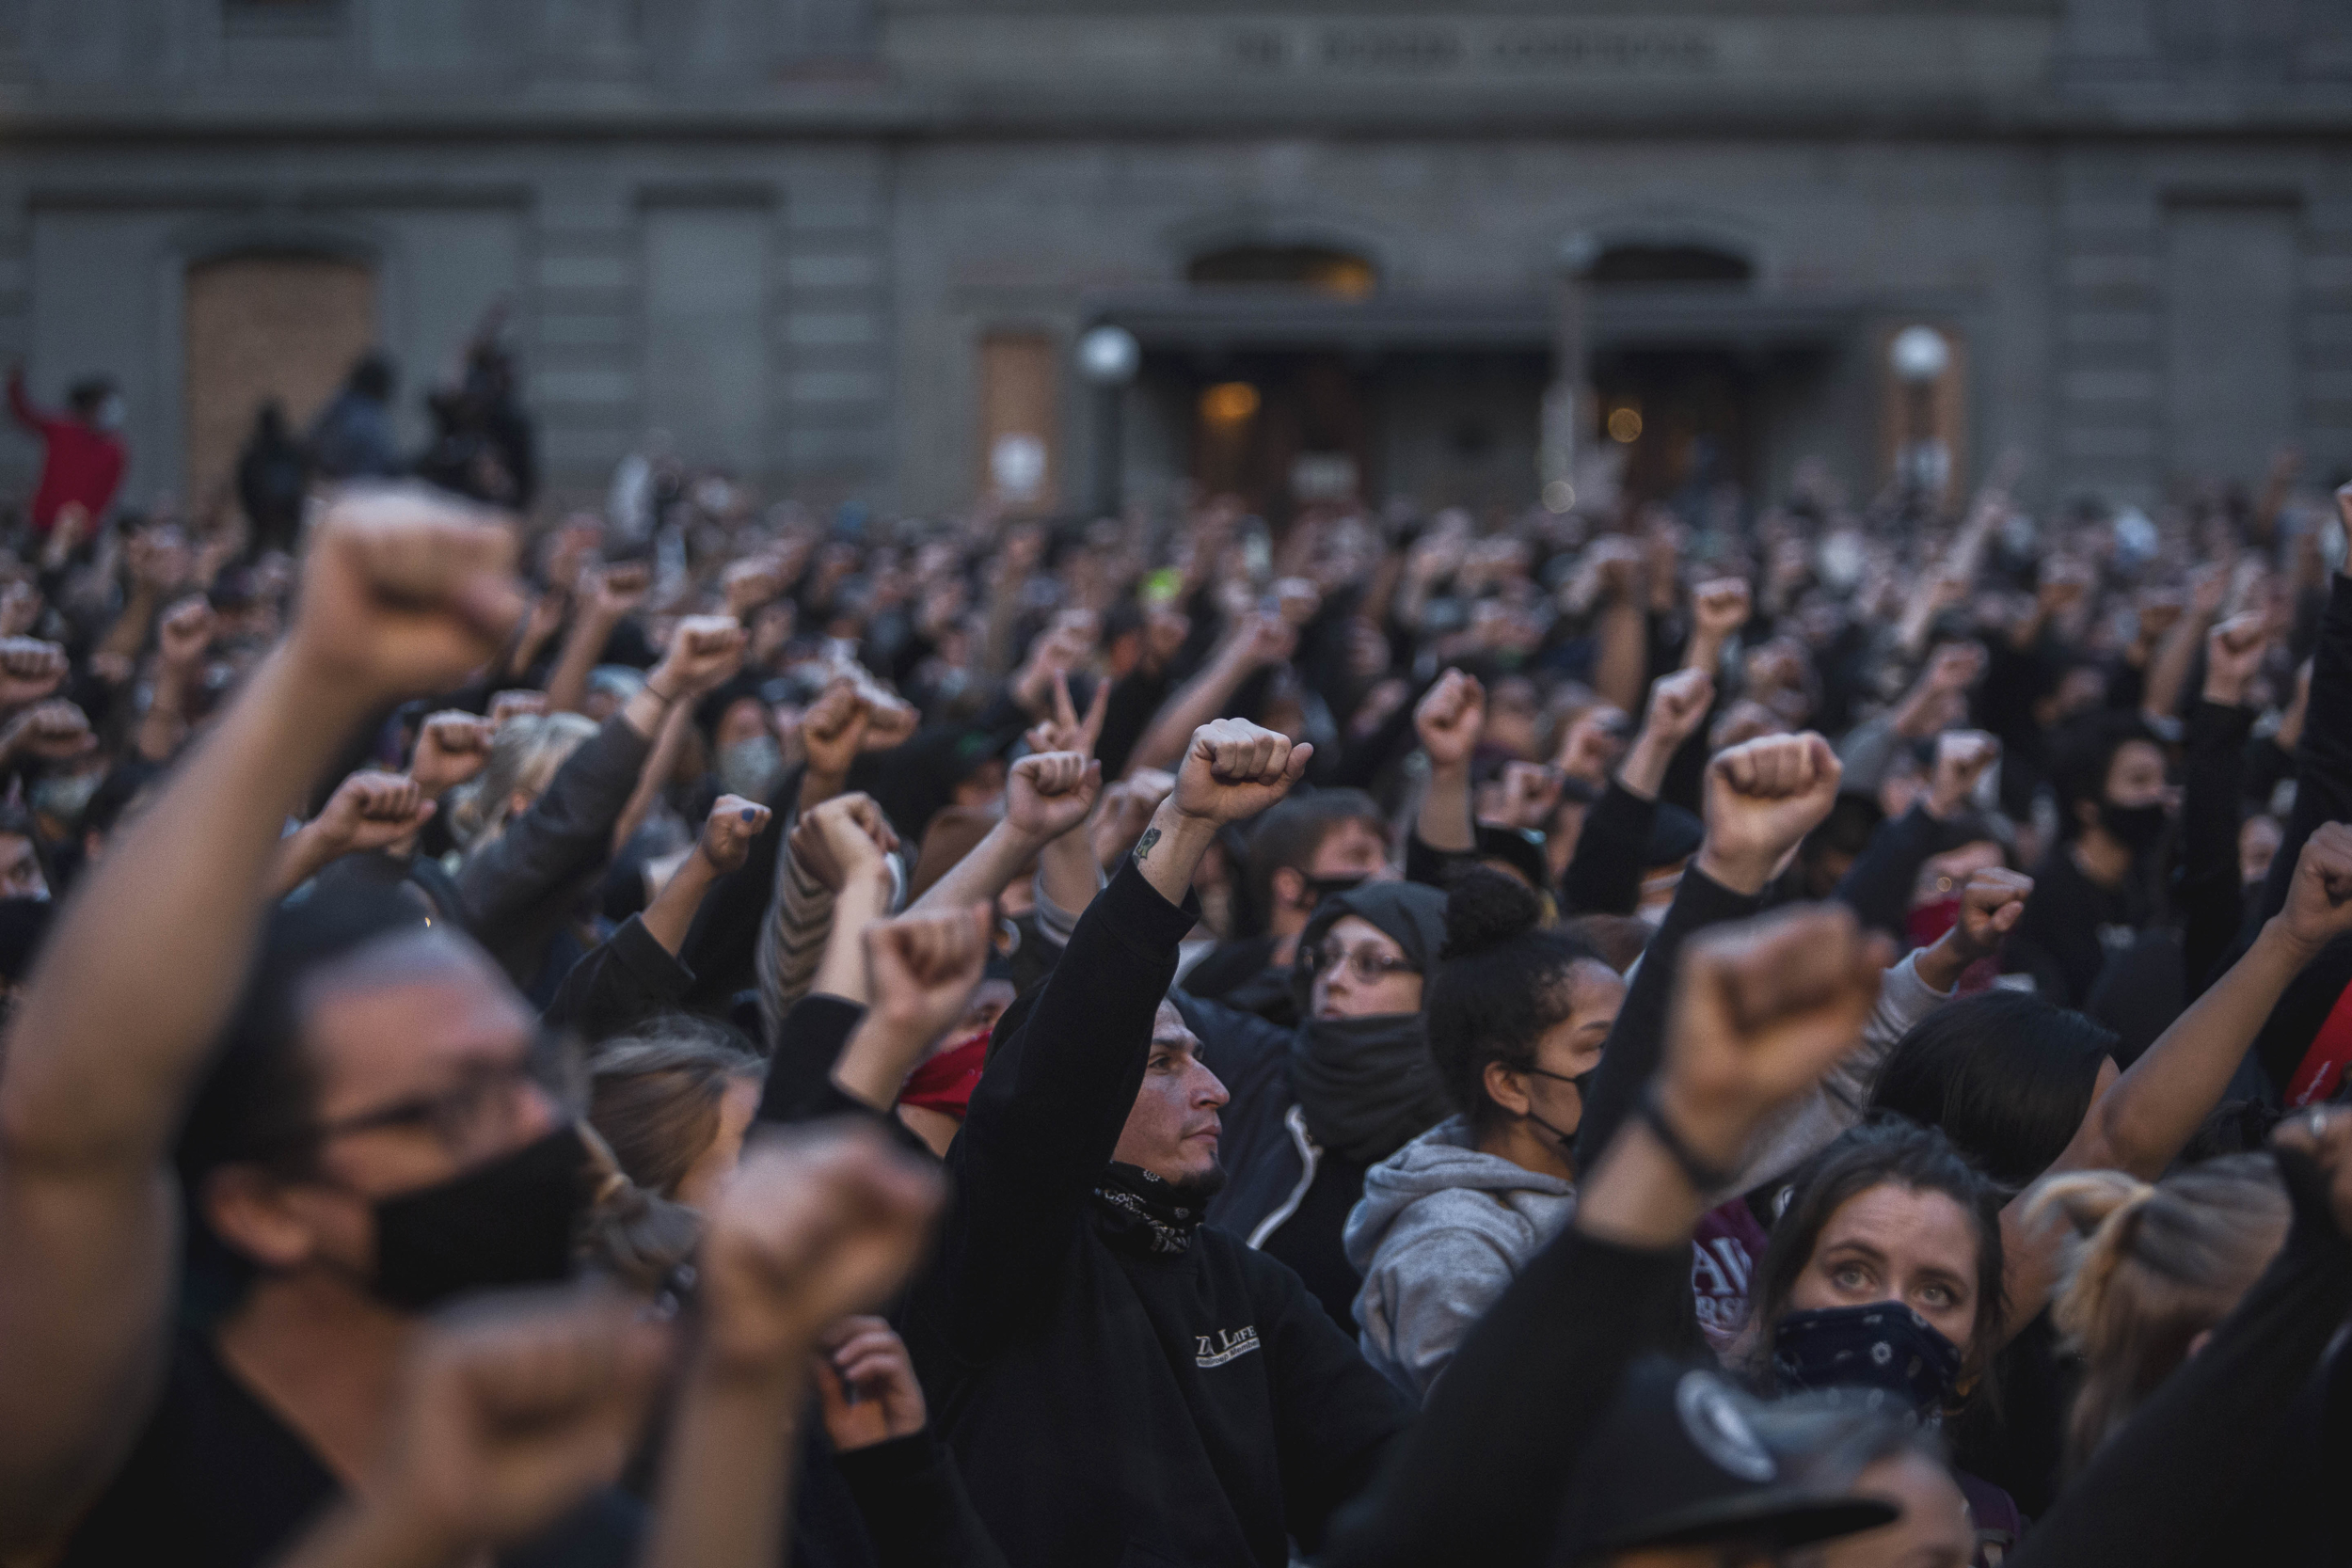 Protesters raise their fists in solidarity during speeches in Pioneer Square on Tuesday evening, June 3. Protests continued for a sixth night in Portland, demonstrating against the death of George Floyd, a black man killed by police in Minneapolis. Brooke Herbert / Staff